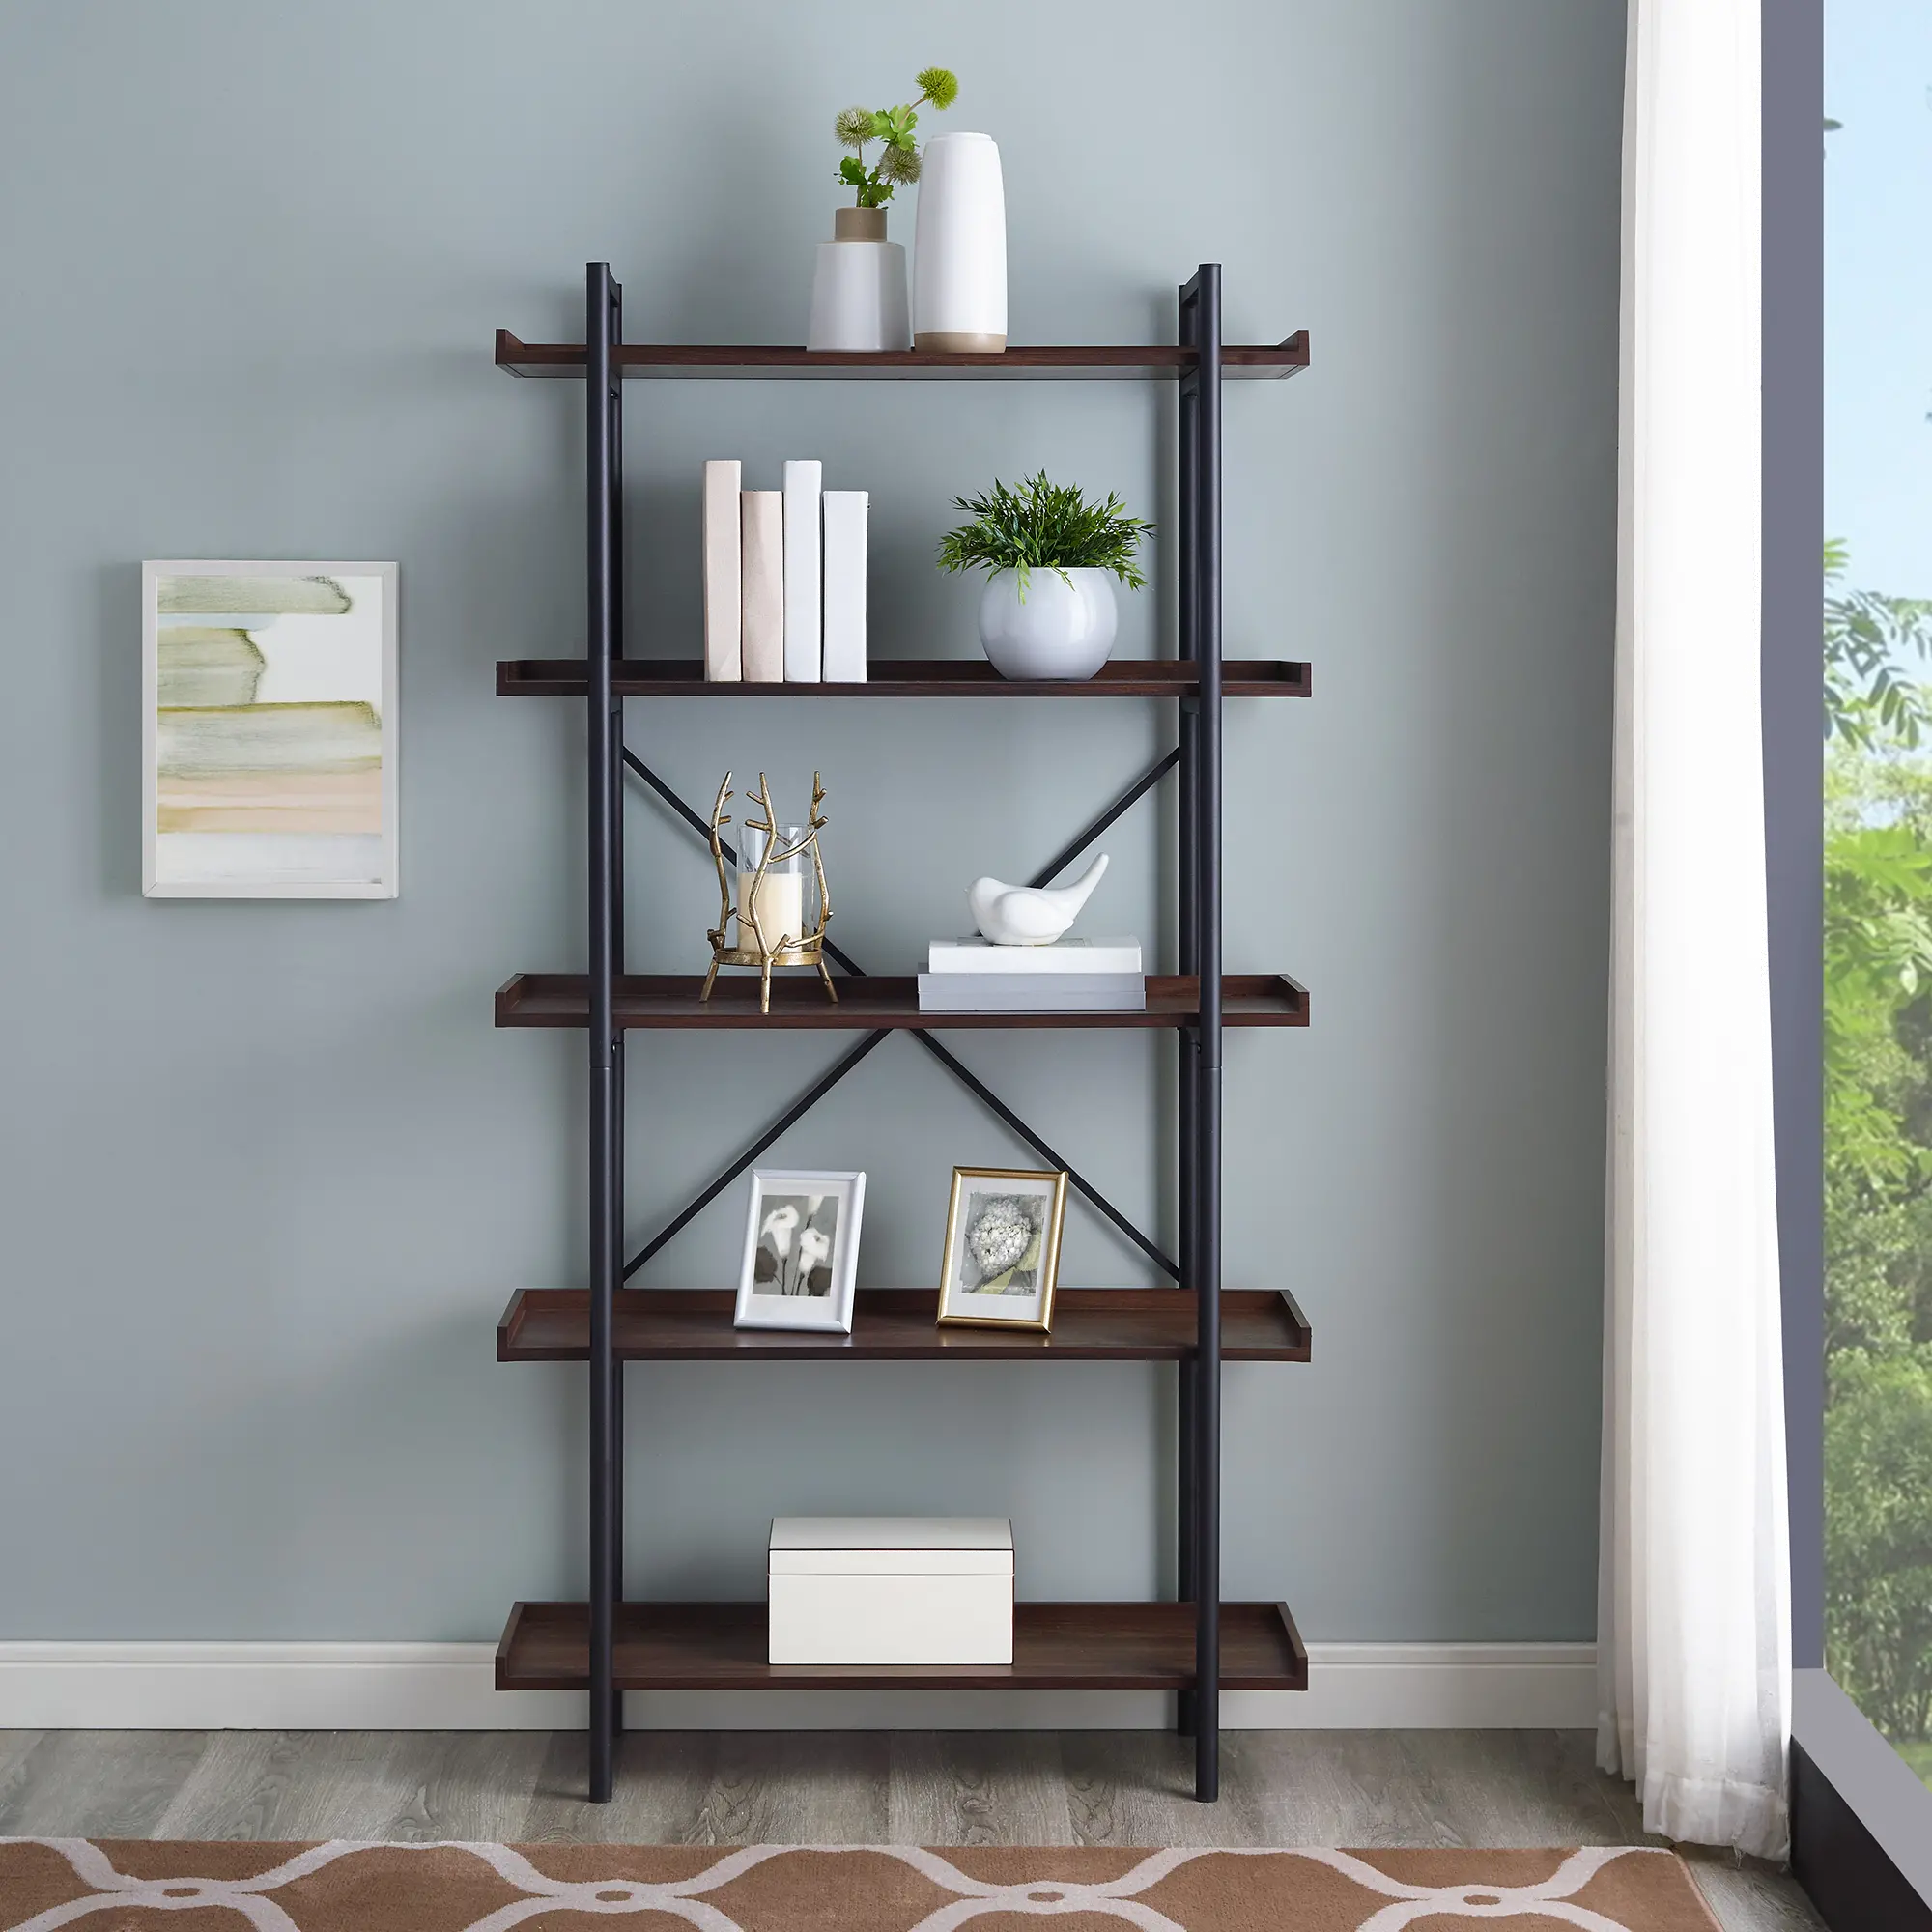 BS68UPDW Rustic Industrial 68 Inch Wood Bookcase with 5 She sku BS68UPDW